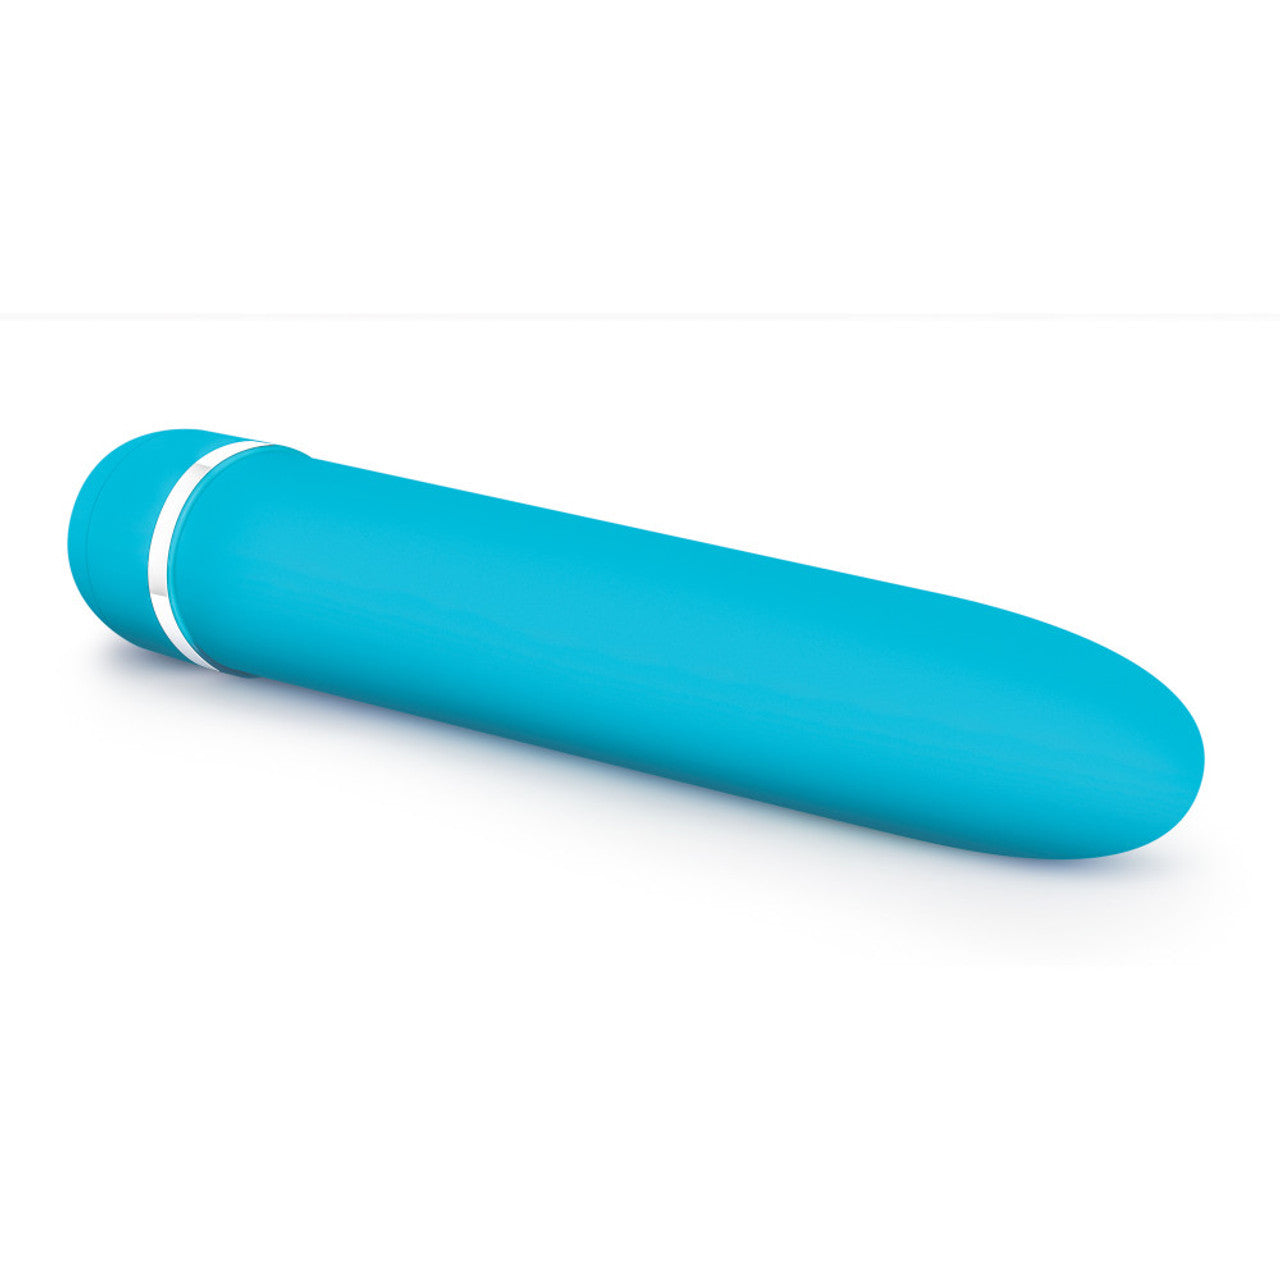 Rose Luxuriate 7" Vibrator - Blue - Thorn & Feather